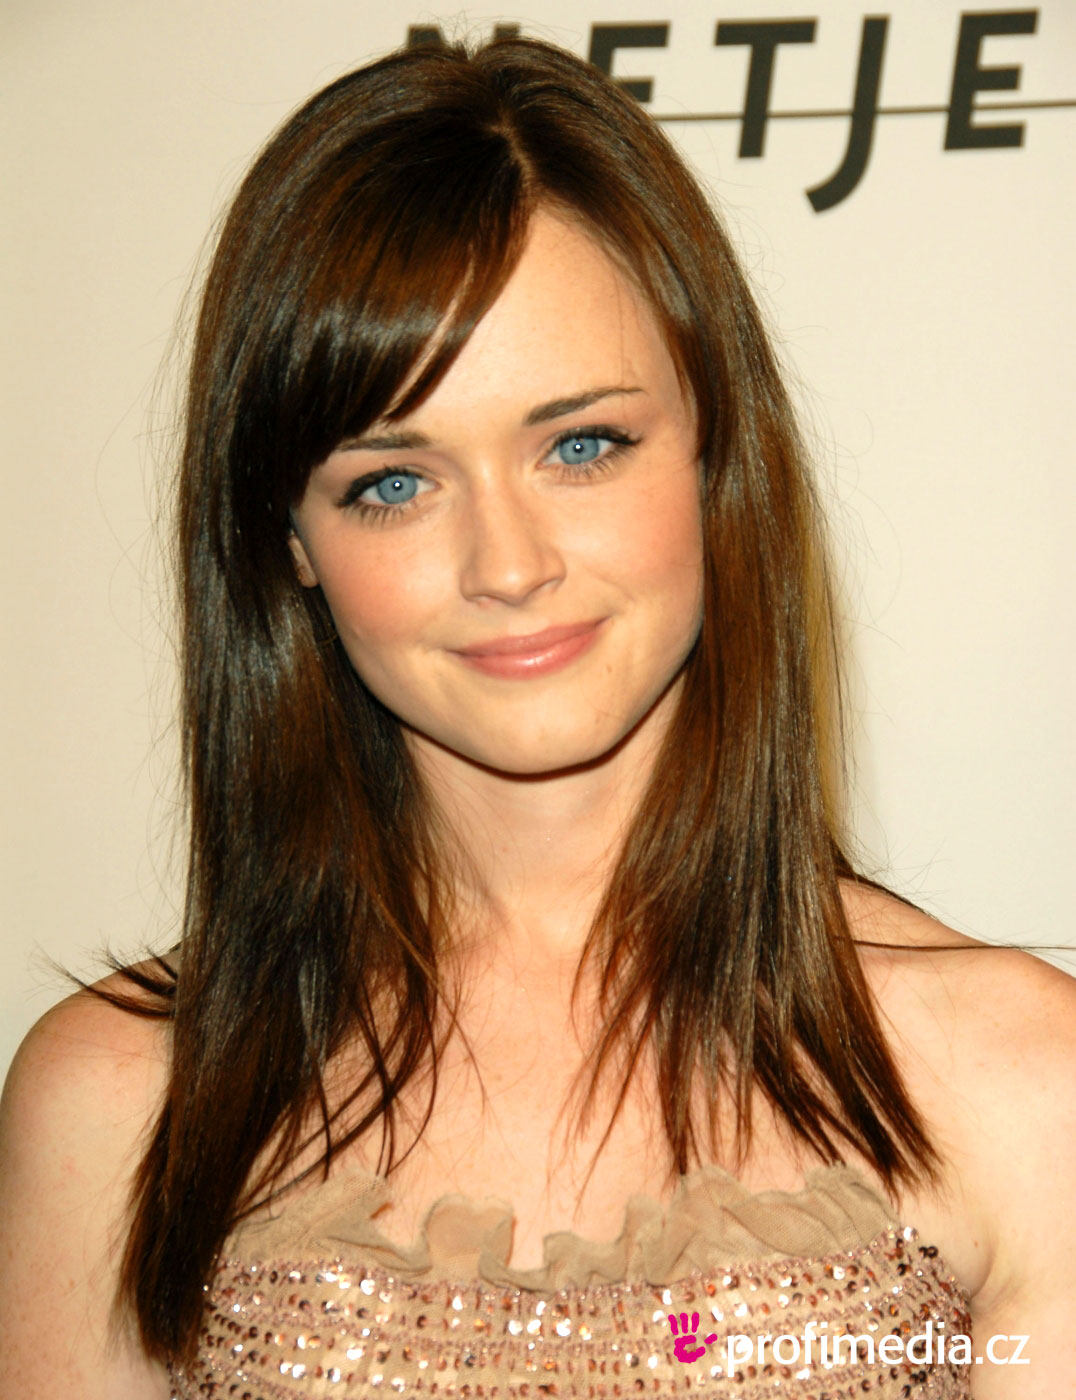 Long Wavy Cute Hairstyles, Long Hairstyle 2011, Hairstyle 2011, New Long Hairstyle 2011, Celebrity Long Hairstyles 2130